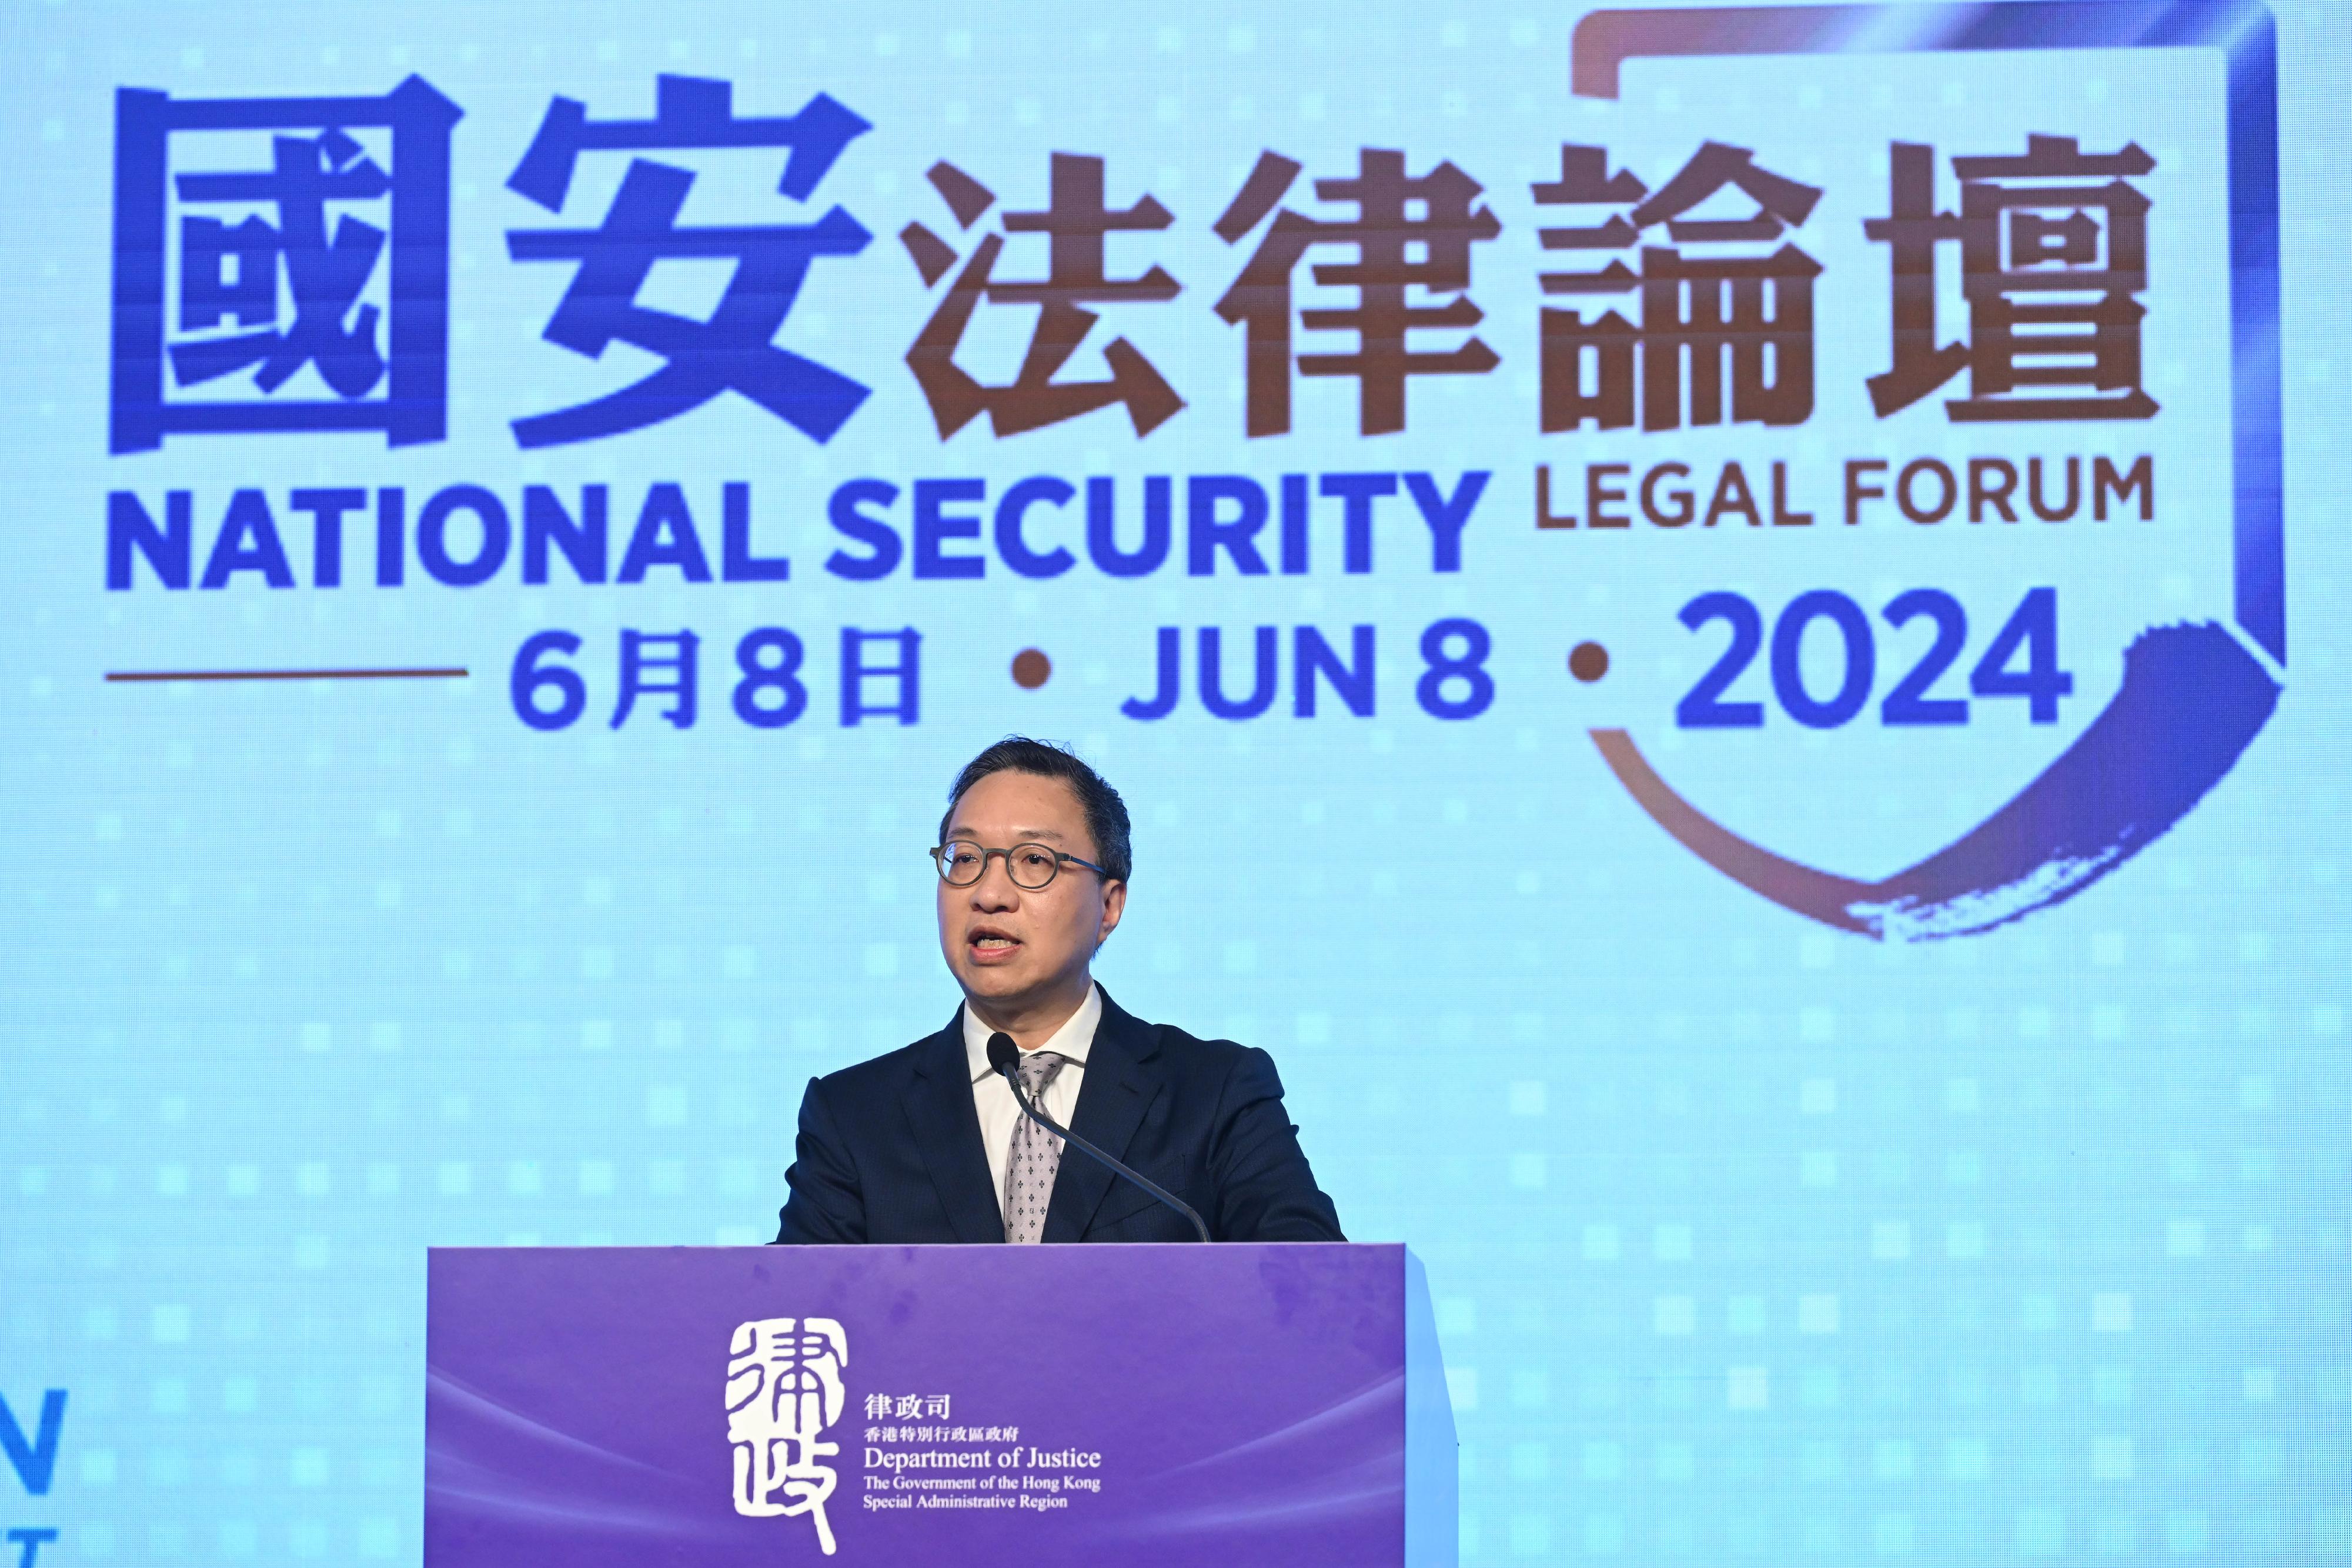 The Department of Justice today (June 8) held the National Security Legal Forum with the theme of "Looking Back and Ahead, New Dawn for Development". Photo shows the Secretary for Justice, Mr Paul Lam, SC, delivering his opening remarks at the forum.